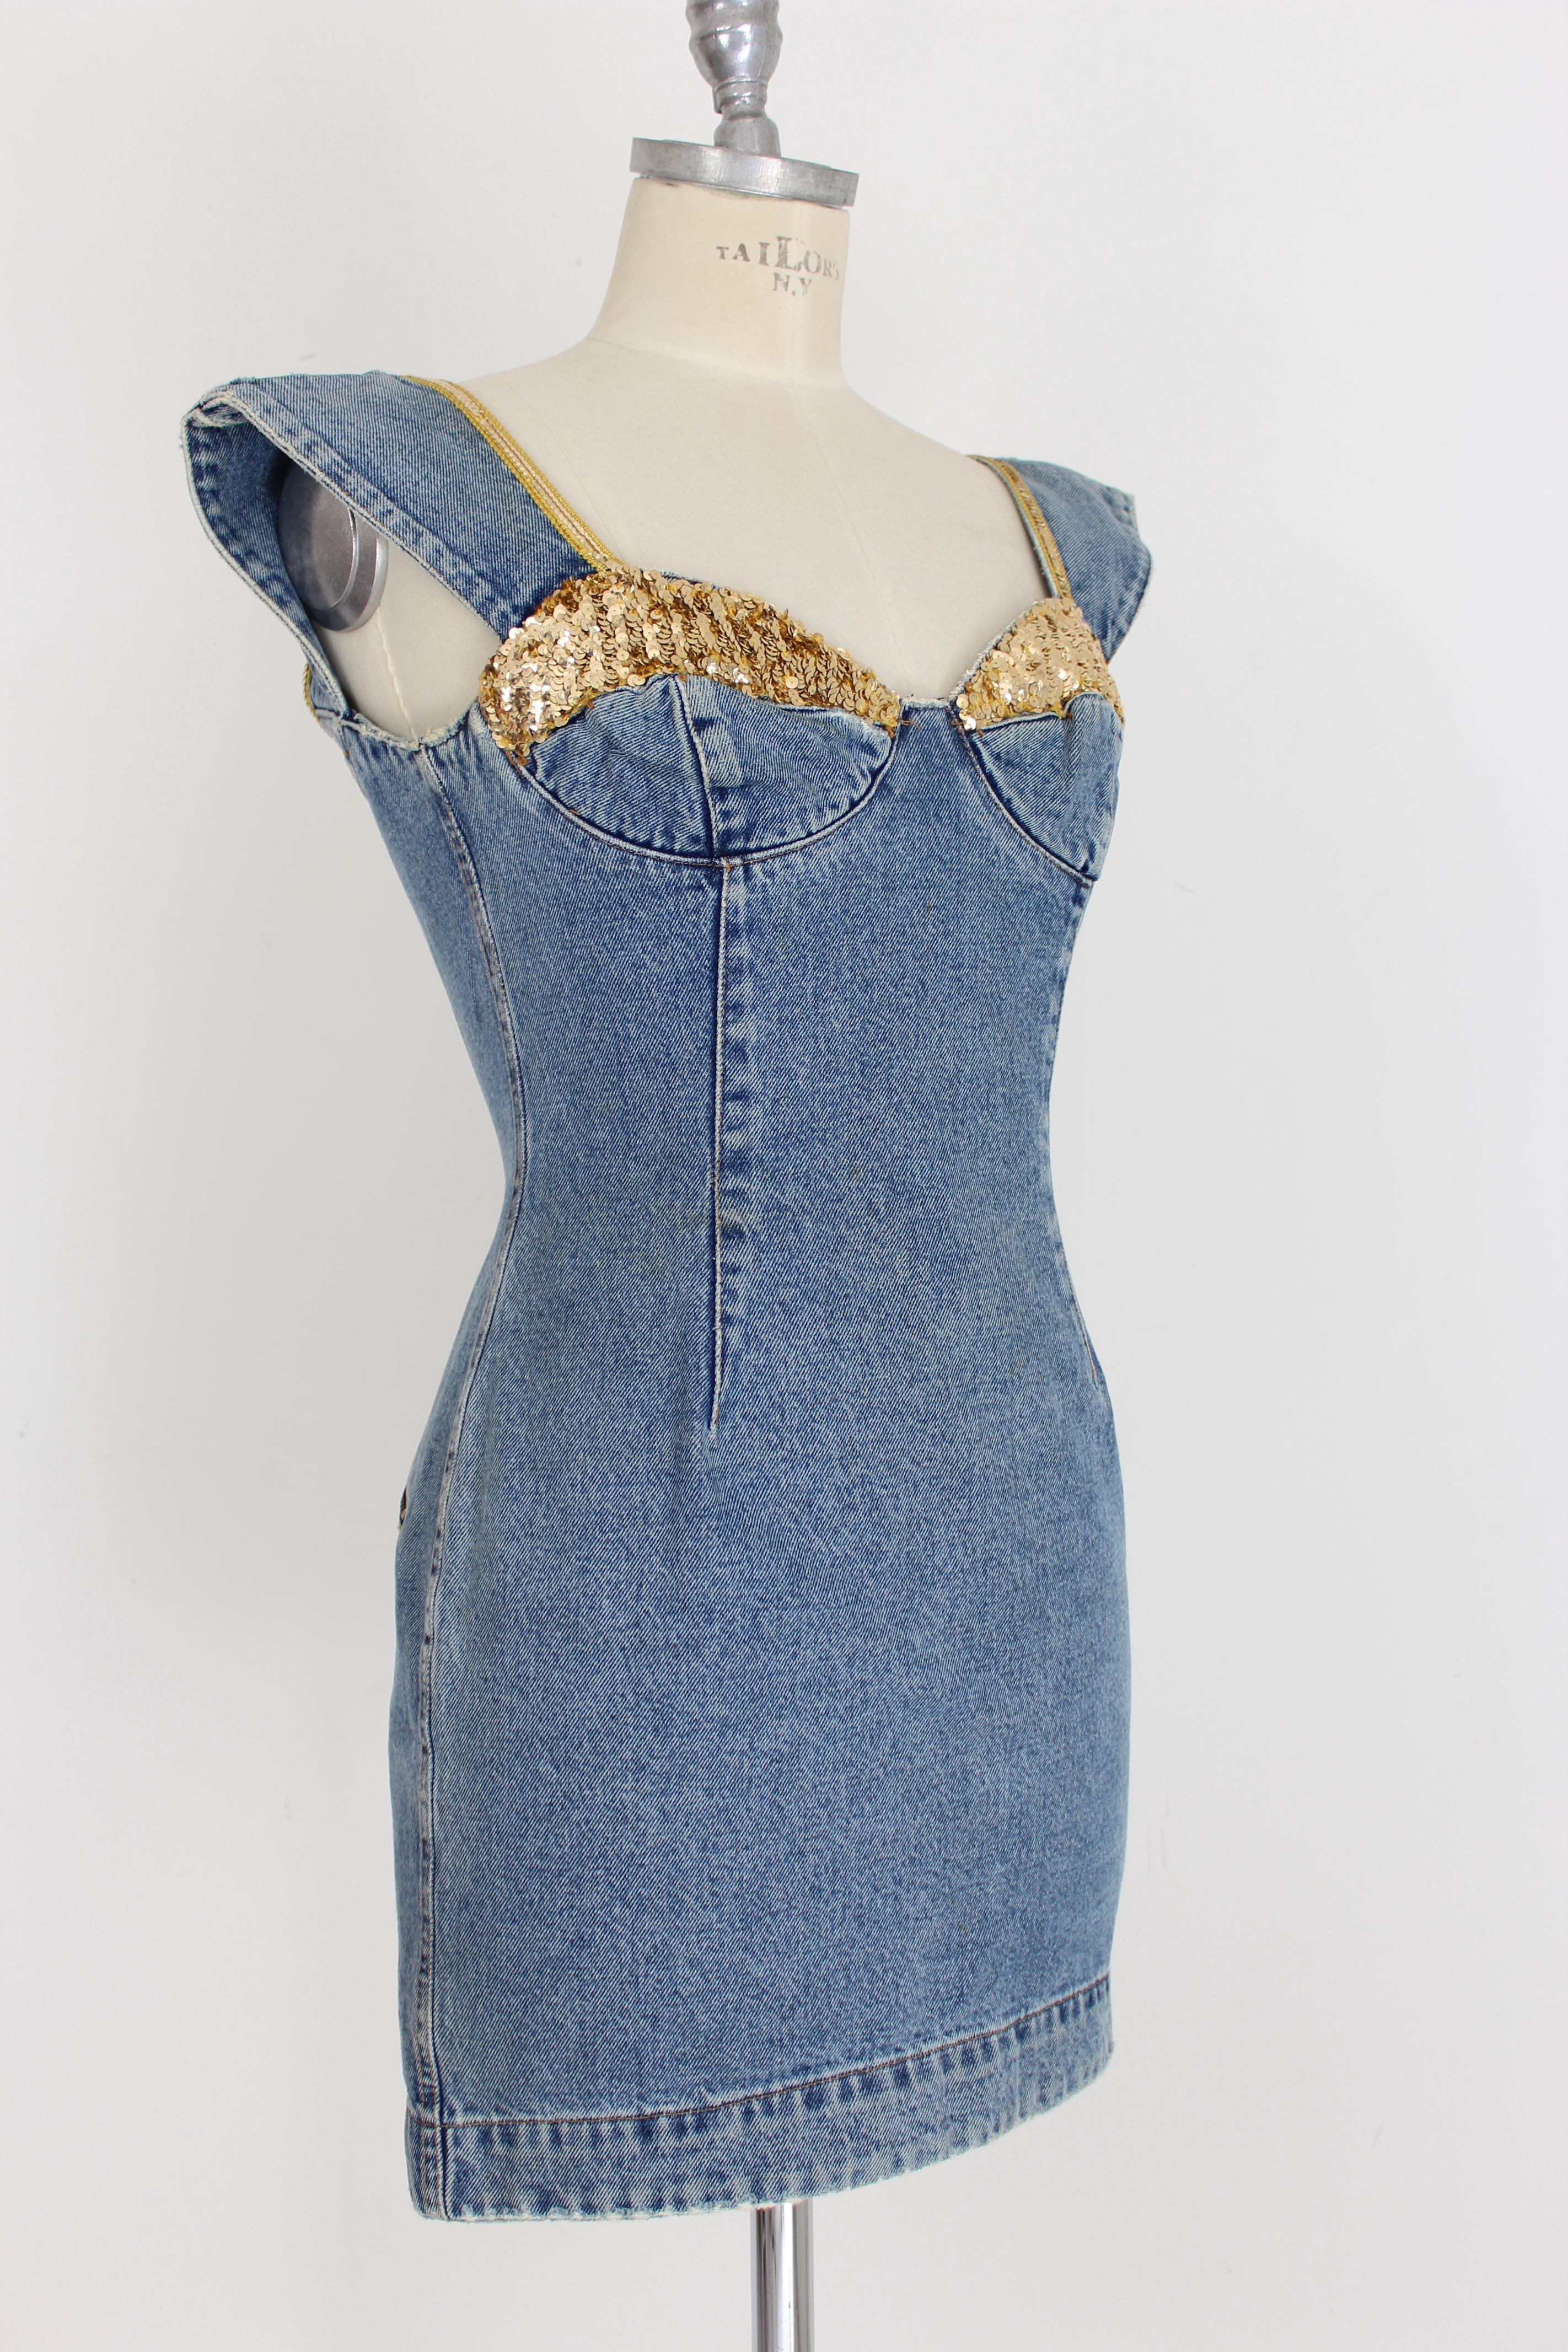 Katherine Hamnett vintage 90s woman dress. Short blue denim dress, sweetheart neckline. Golden sequin applications on the breast and straps. Zipper closure on the back, two pockets on the bottom of the back. 100% cotton fabric. Made in Italy. Very